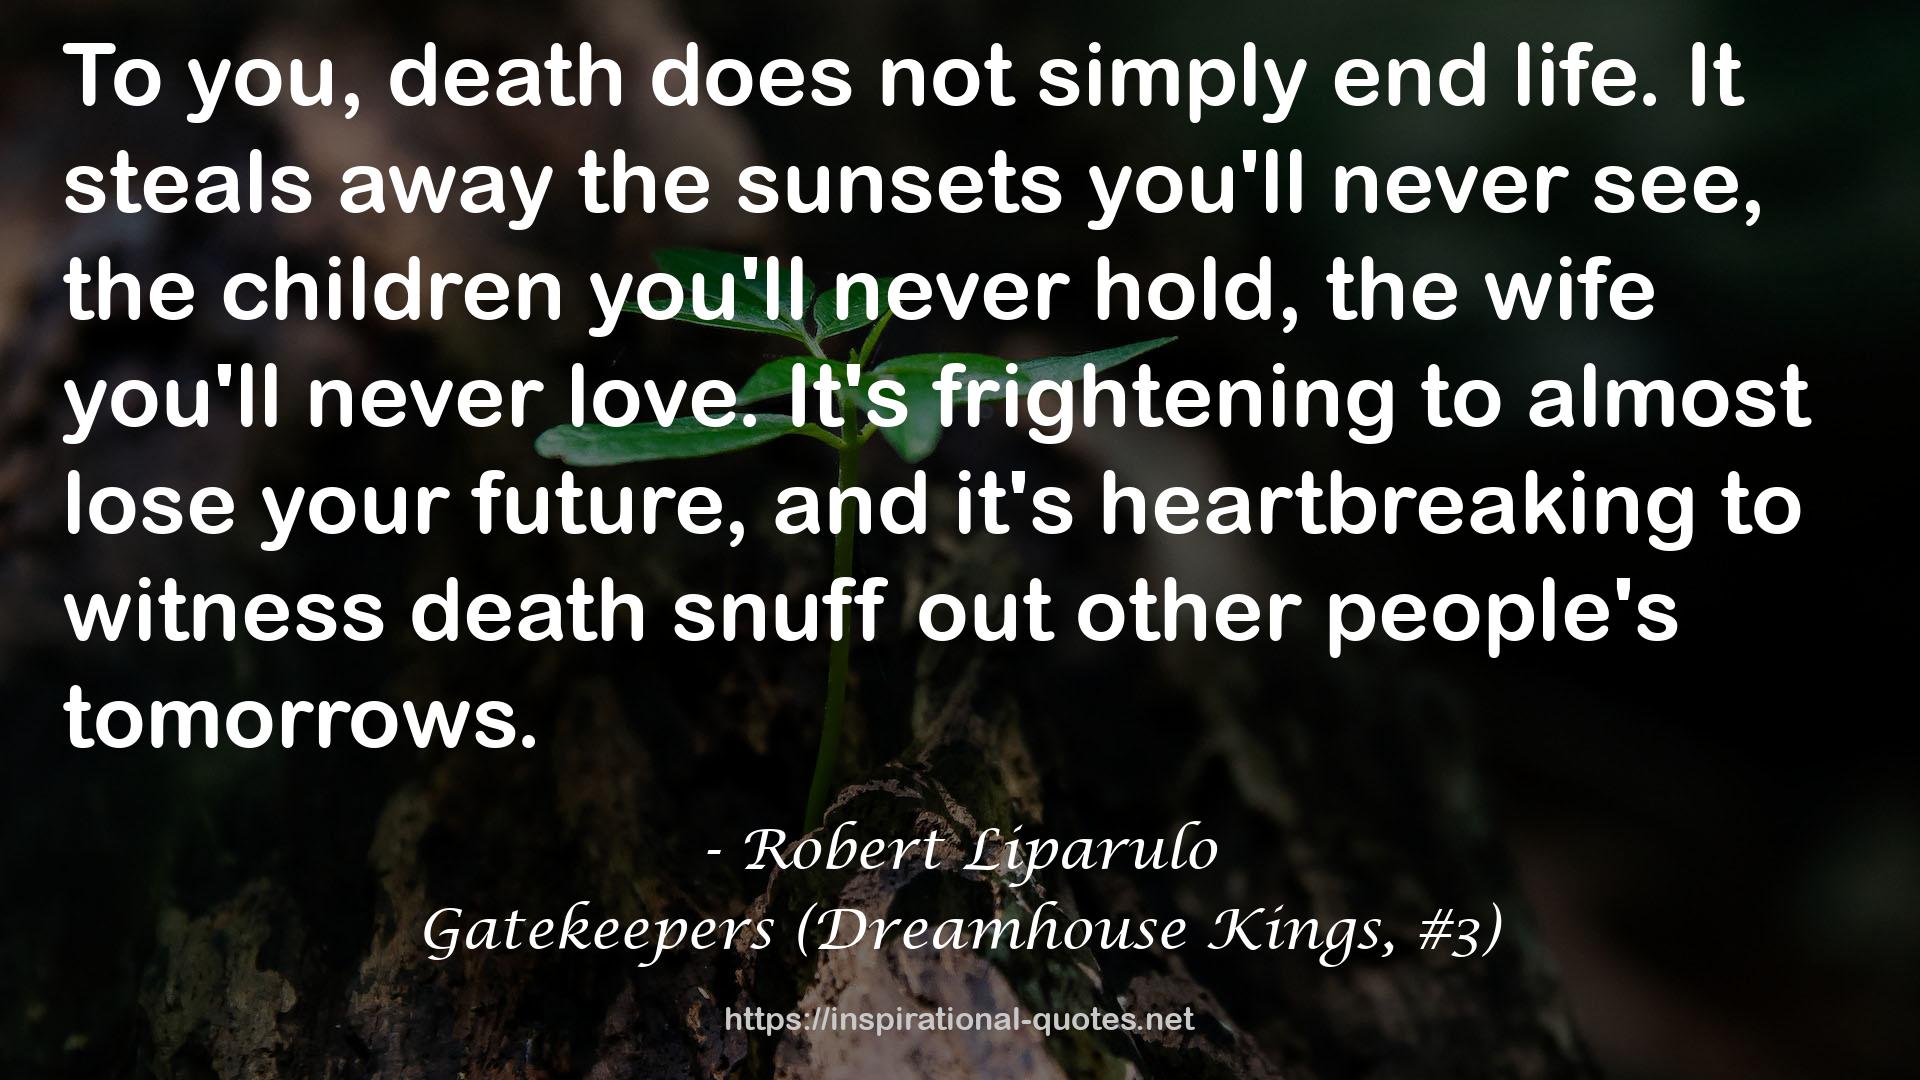 Gatekeepers (Dreamhouse Kings, #3) QUOTES